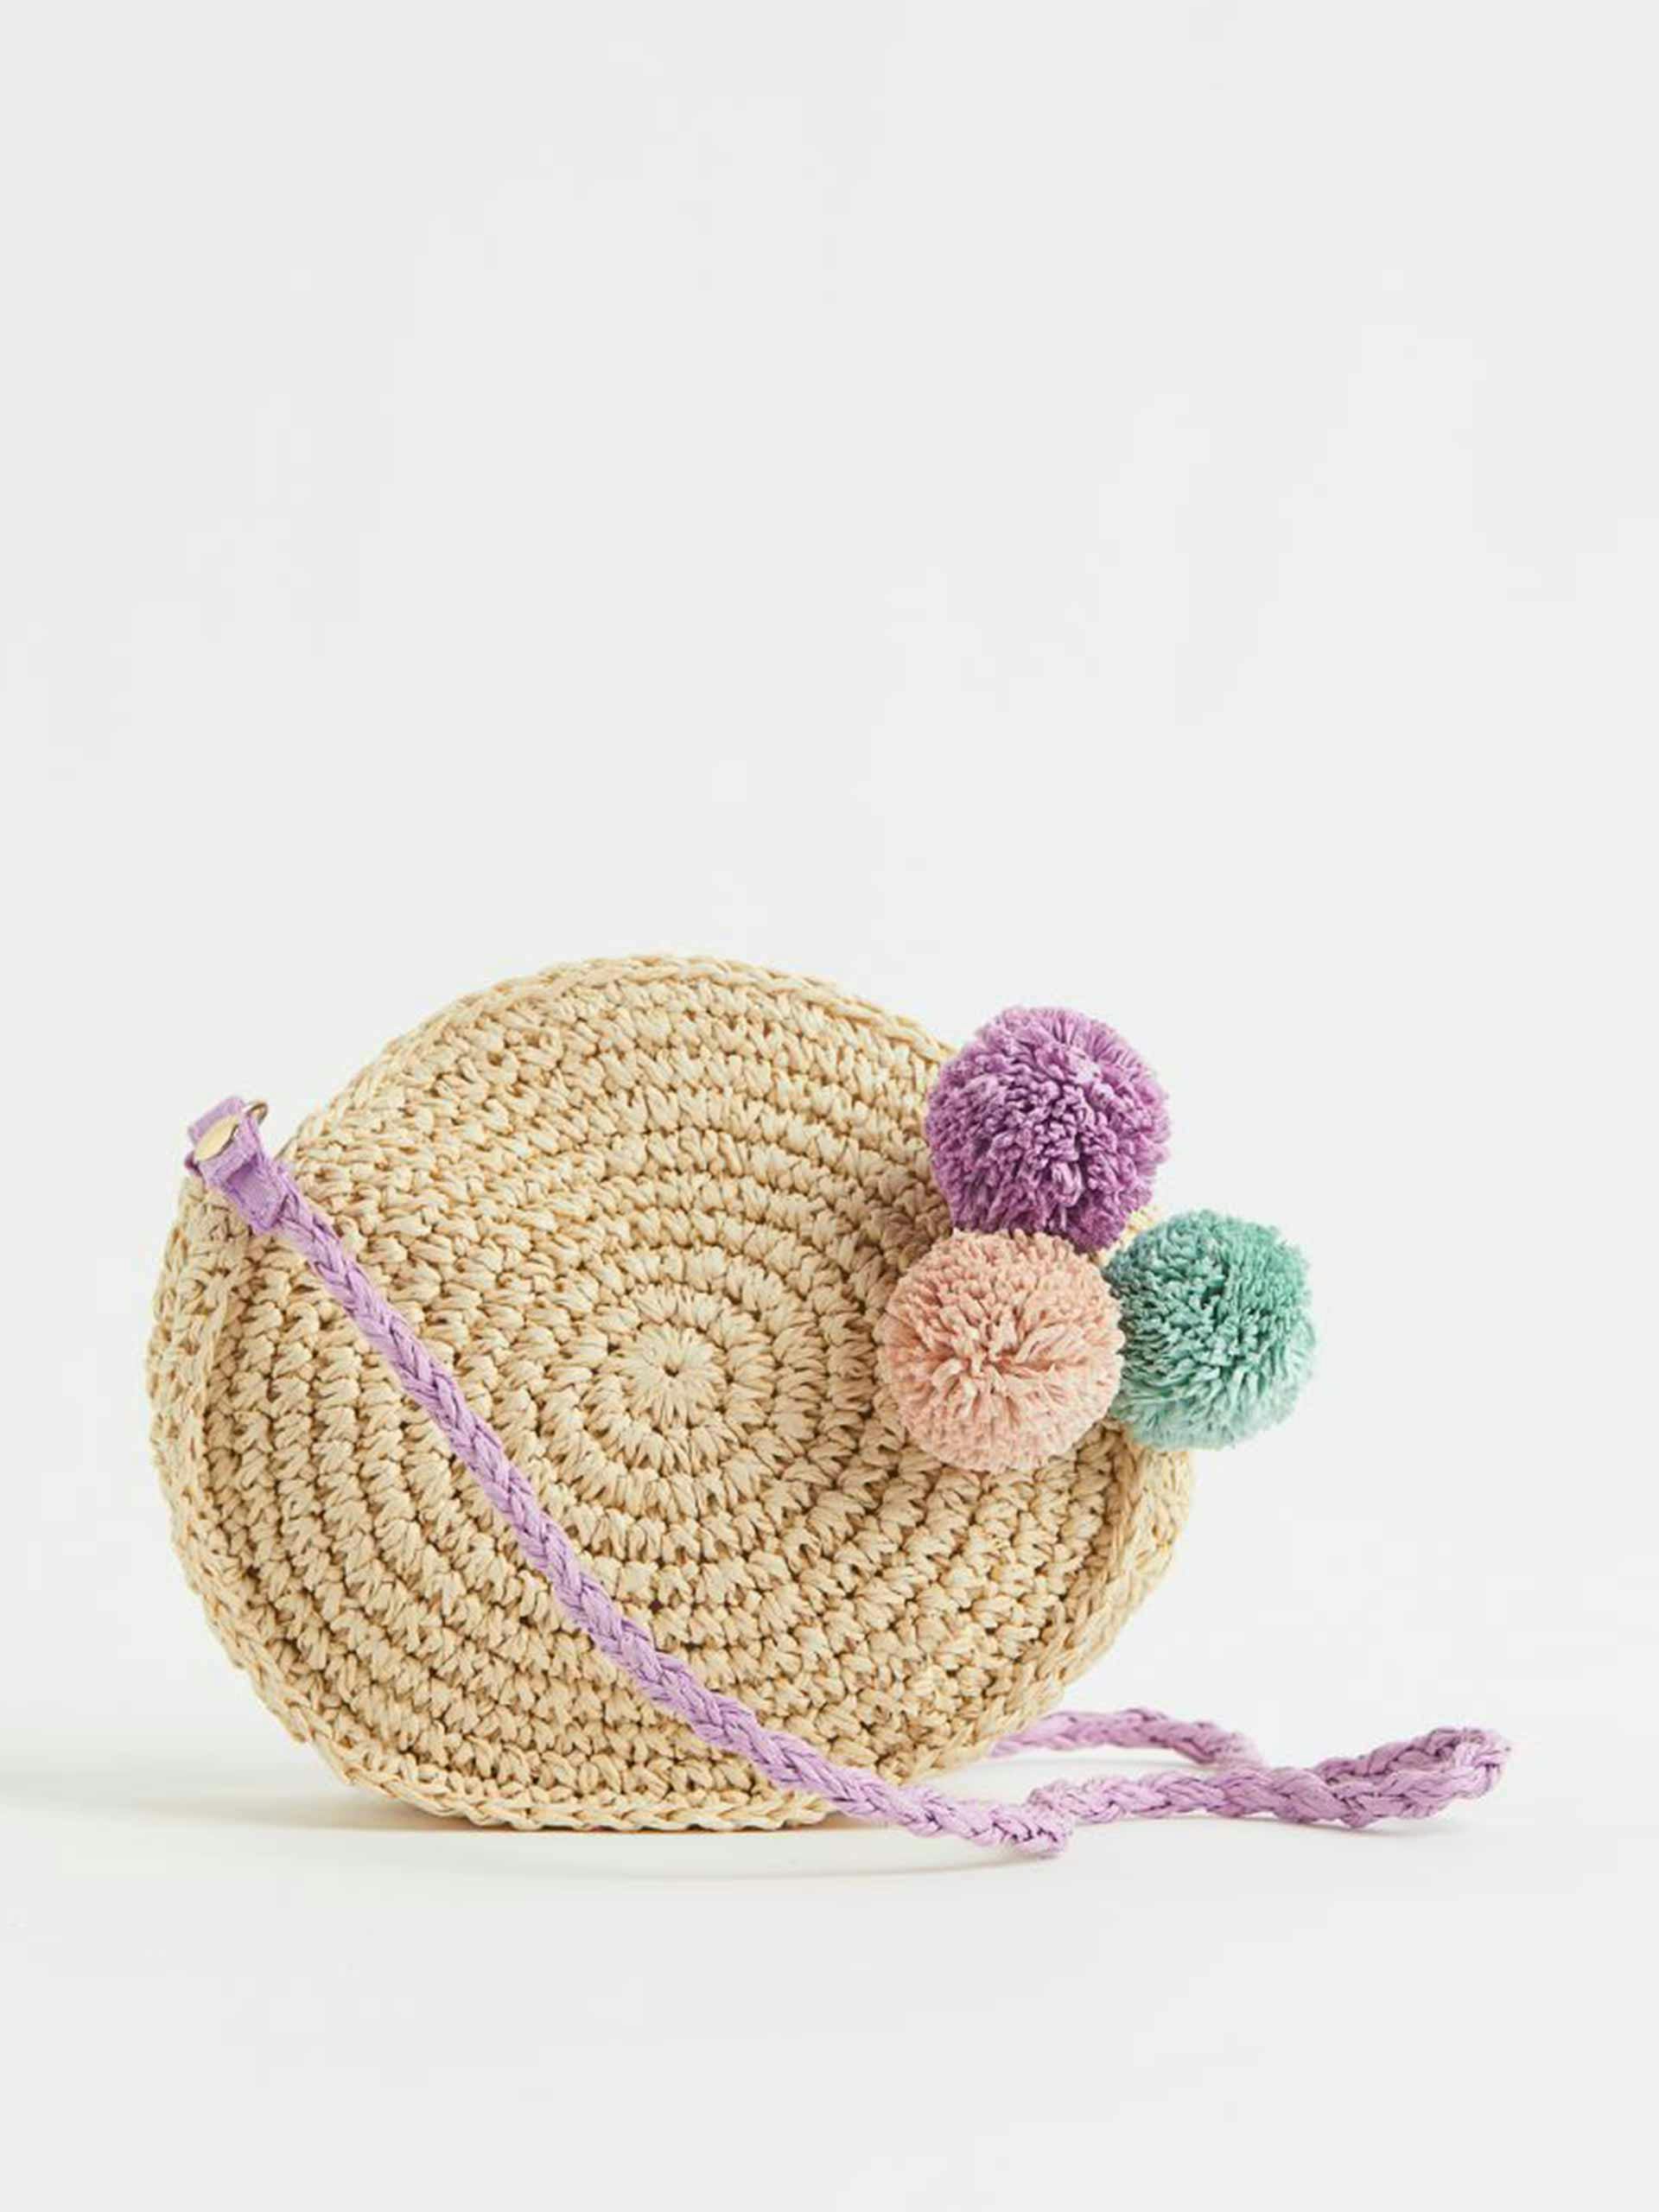 Embroidered straw bag